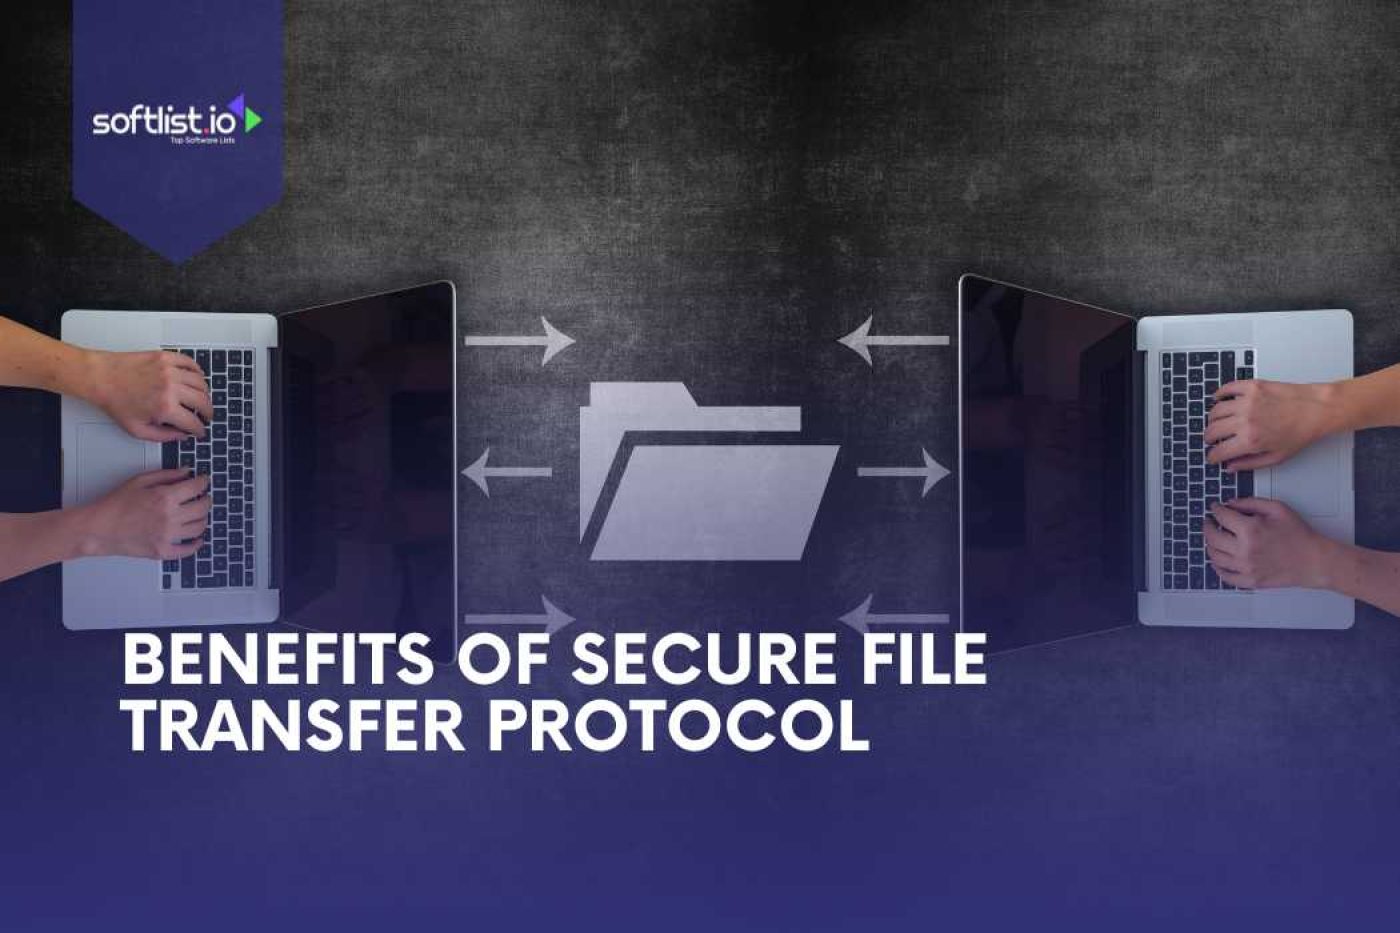 Benefits of Secure File Transfer Protocol